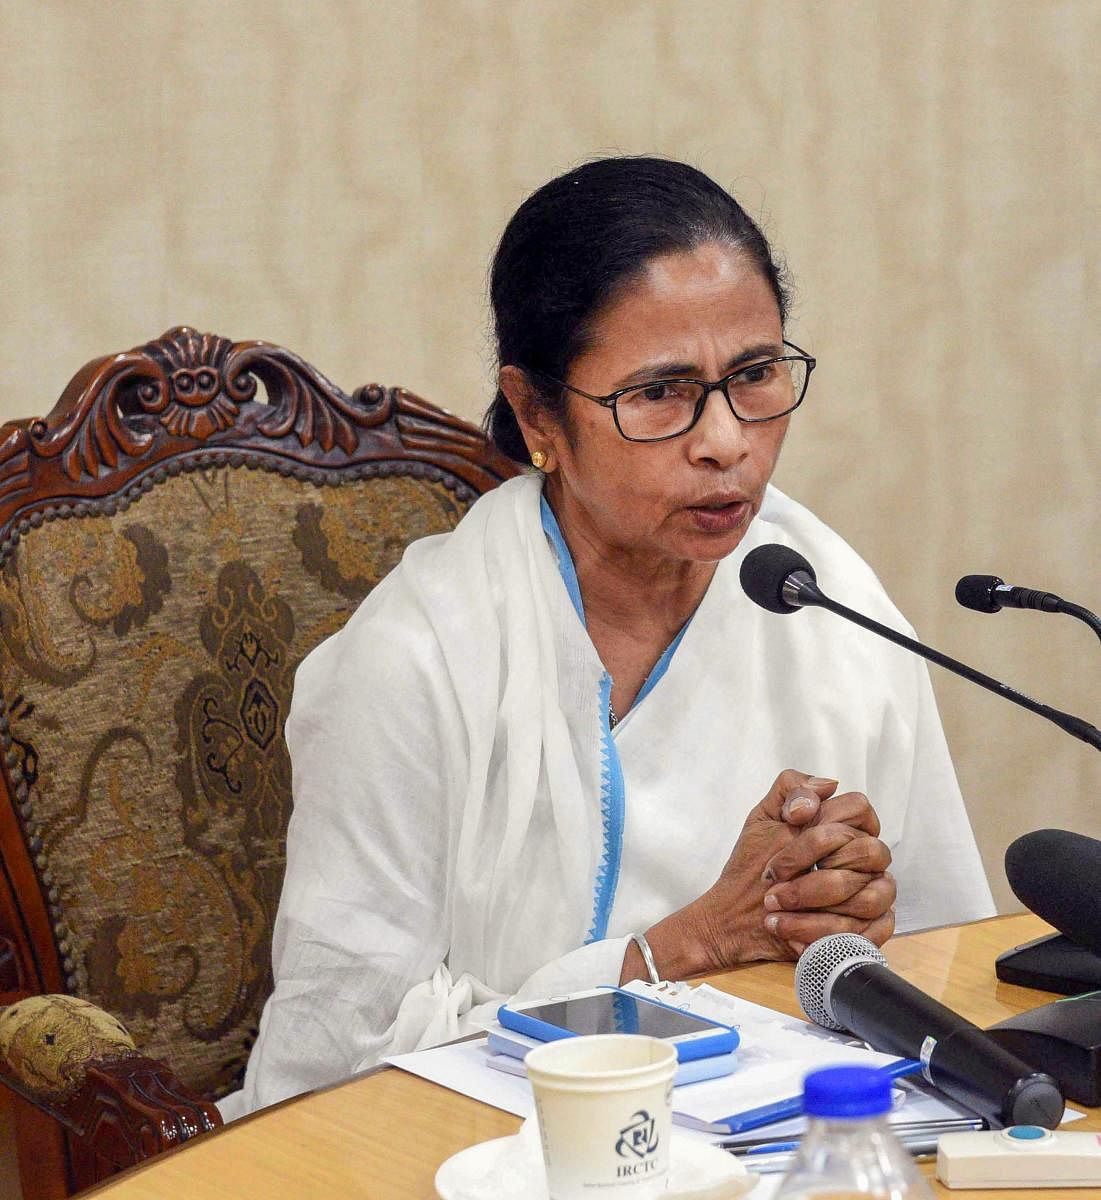 Howrah: West Bengal Chief Minister Mamata Banerjee conducts a meeting with junior doctors and officials, in Howrah, Monday, June 17, 2019. (PTI Photo) (PTI6_17_2019_000236A)